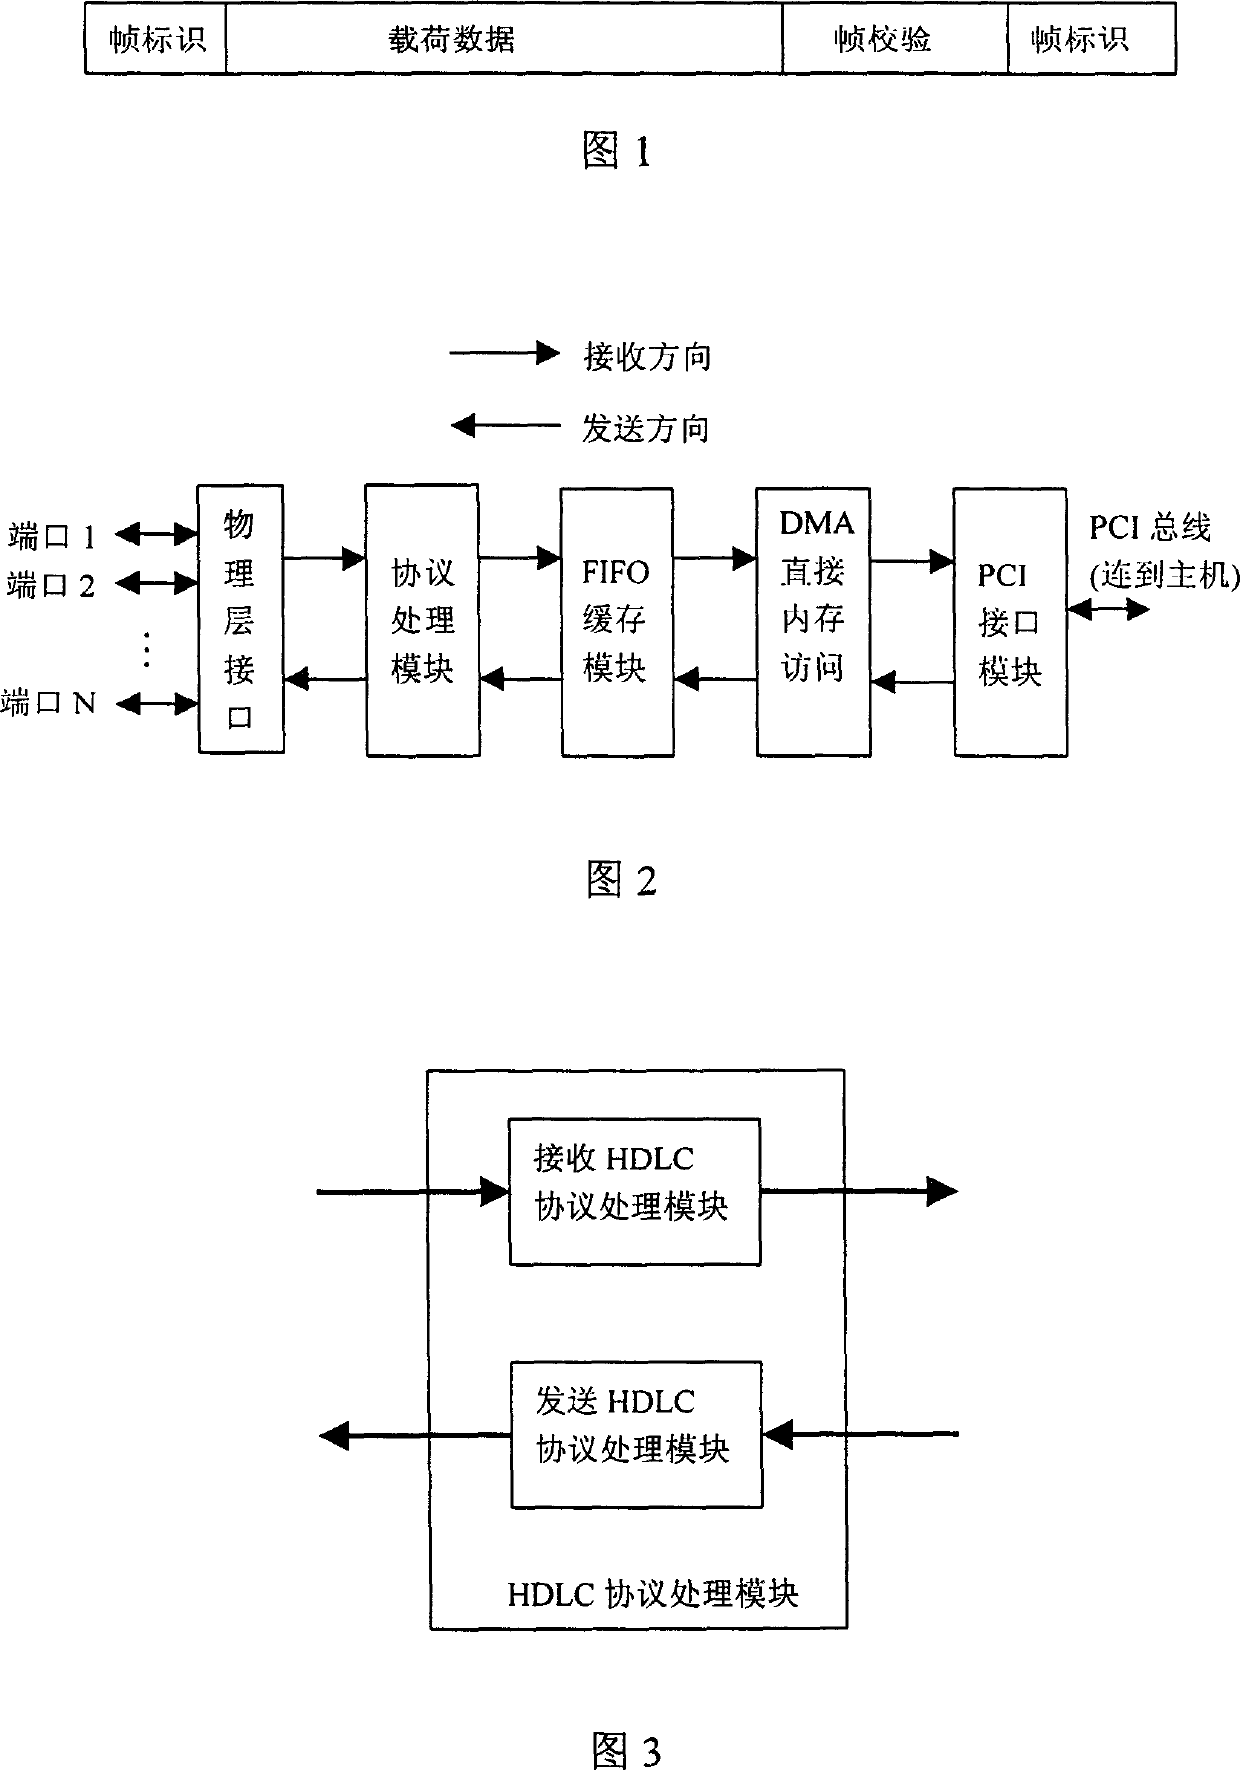 High speed link control protocol transmission processing/module and data processing/method